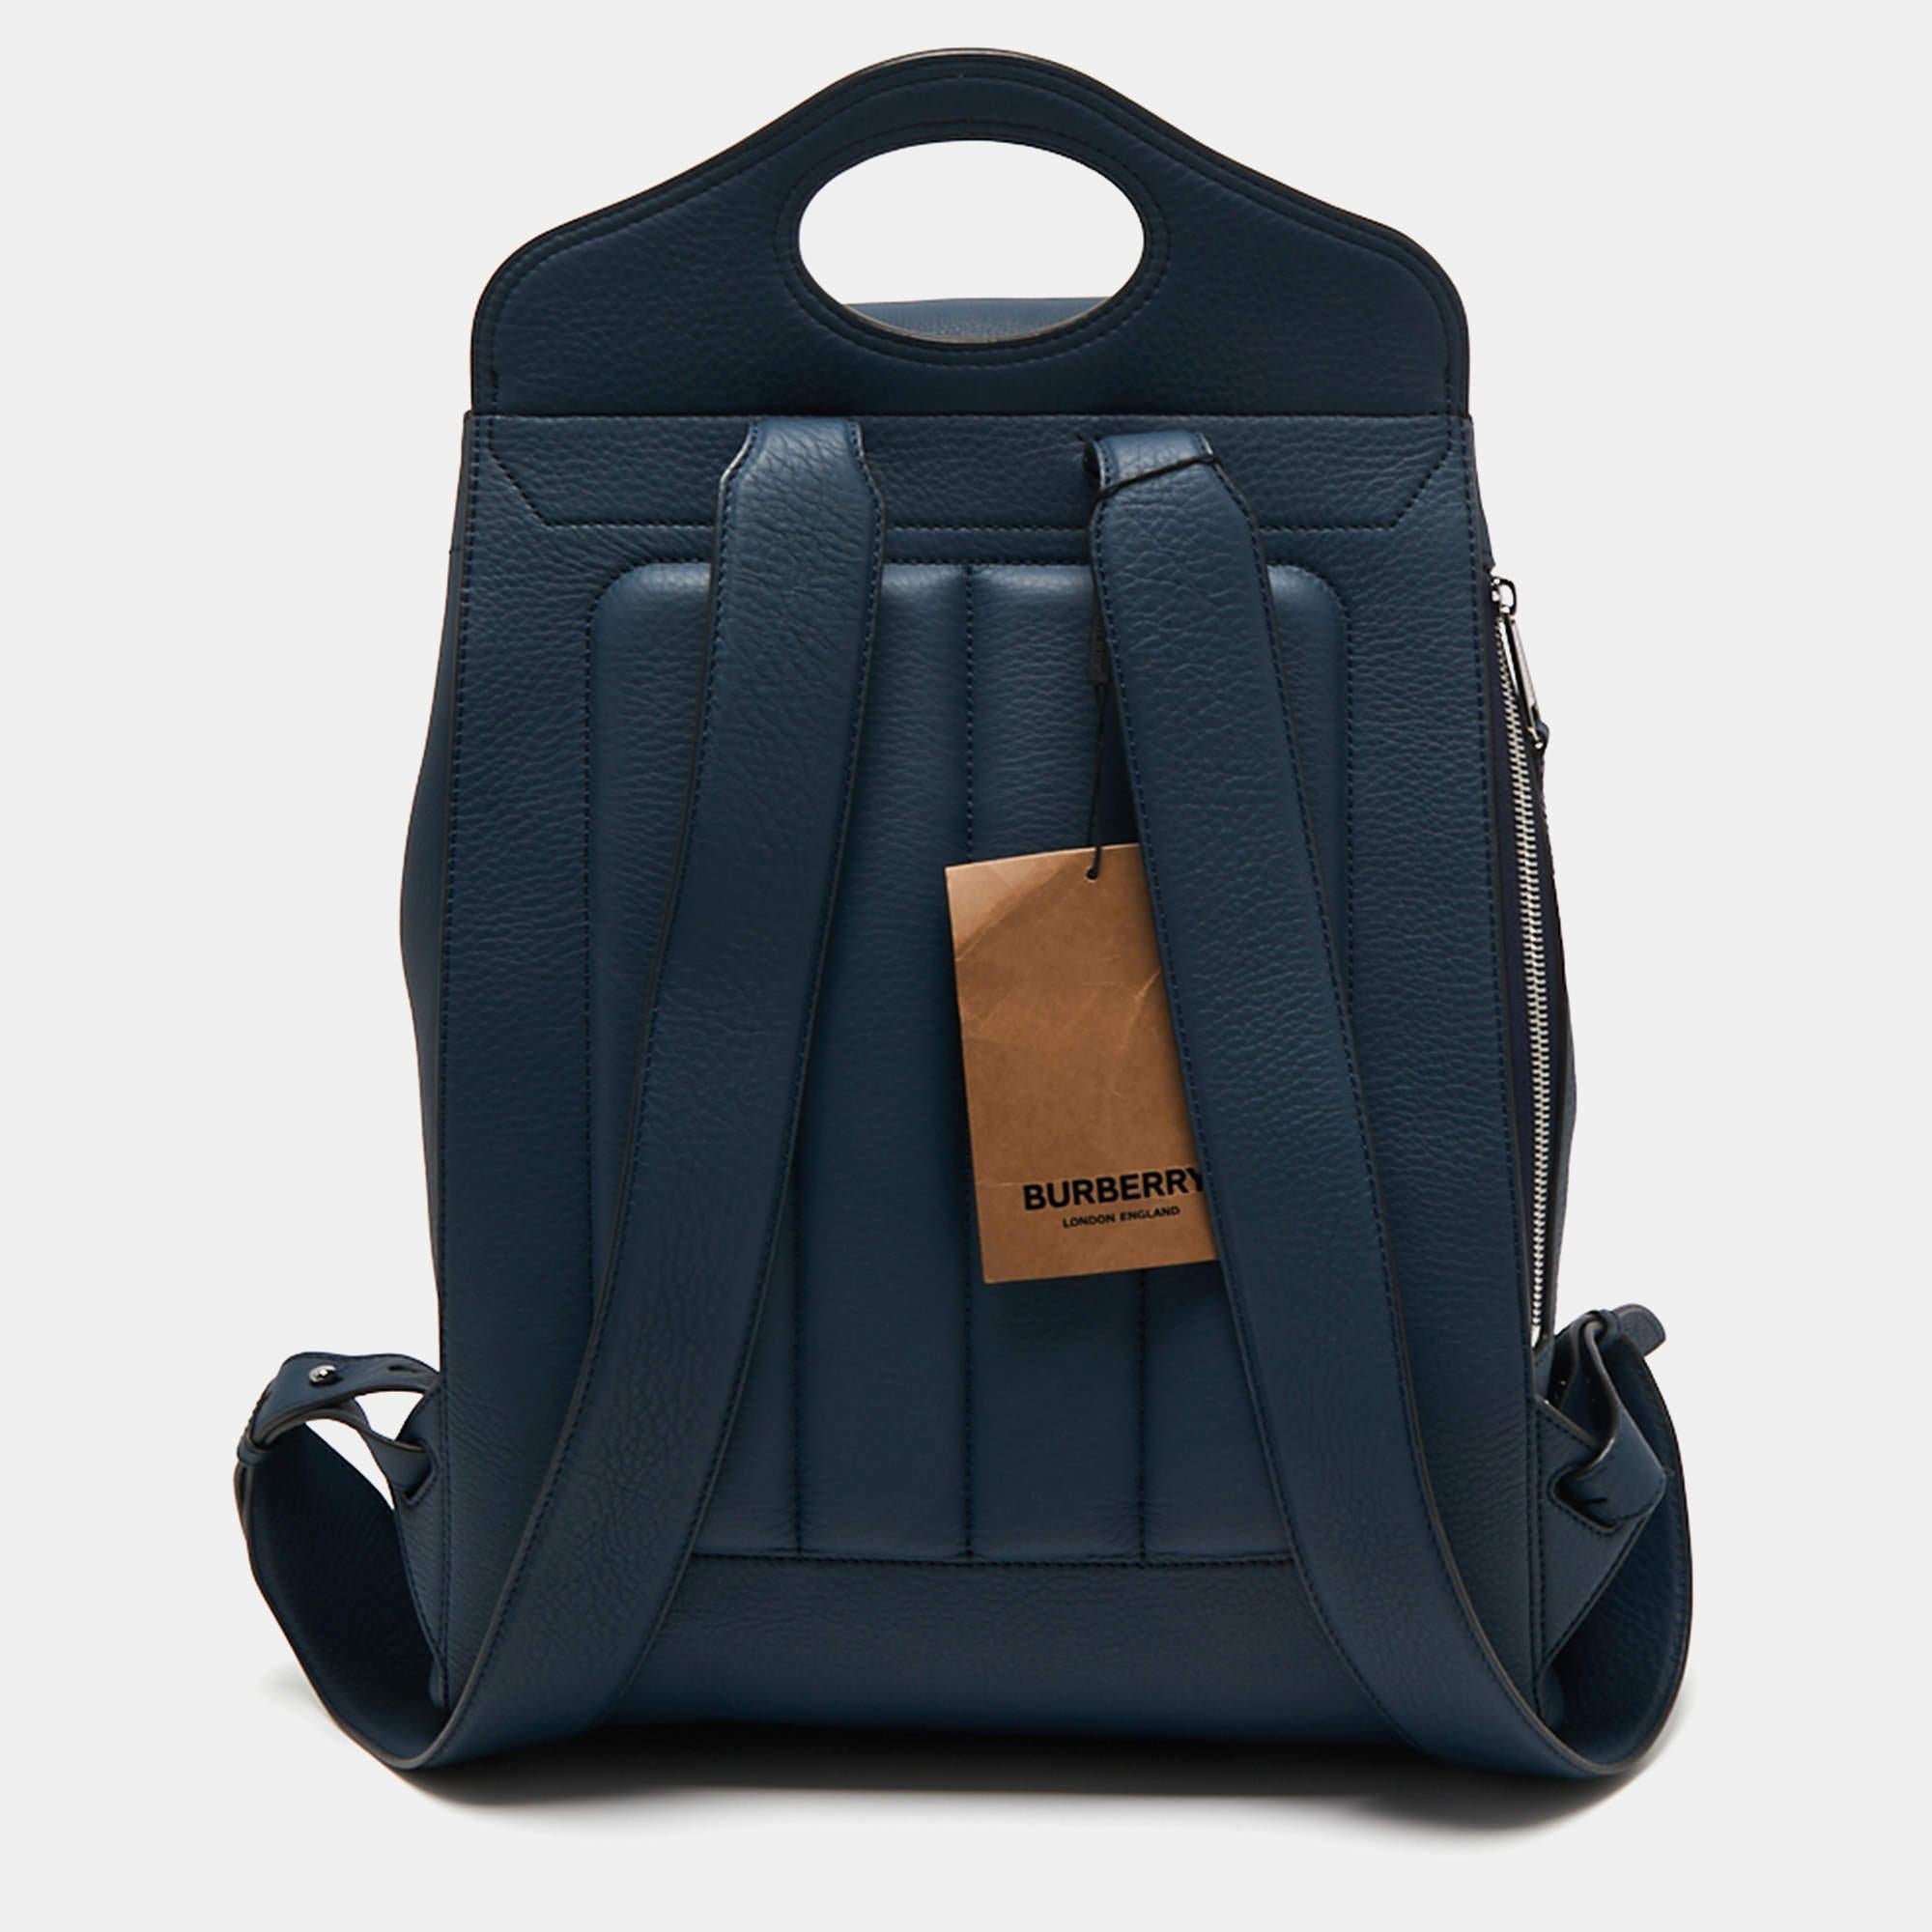 For days of ease and fashion, the House of Burberry has created this classy backpack. It is crafted using blue leather on the exterior. It shows silver-tone hardware and a leather-lined interior. It comes with sturdy shoulder straps for convenience.